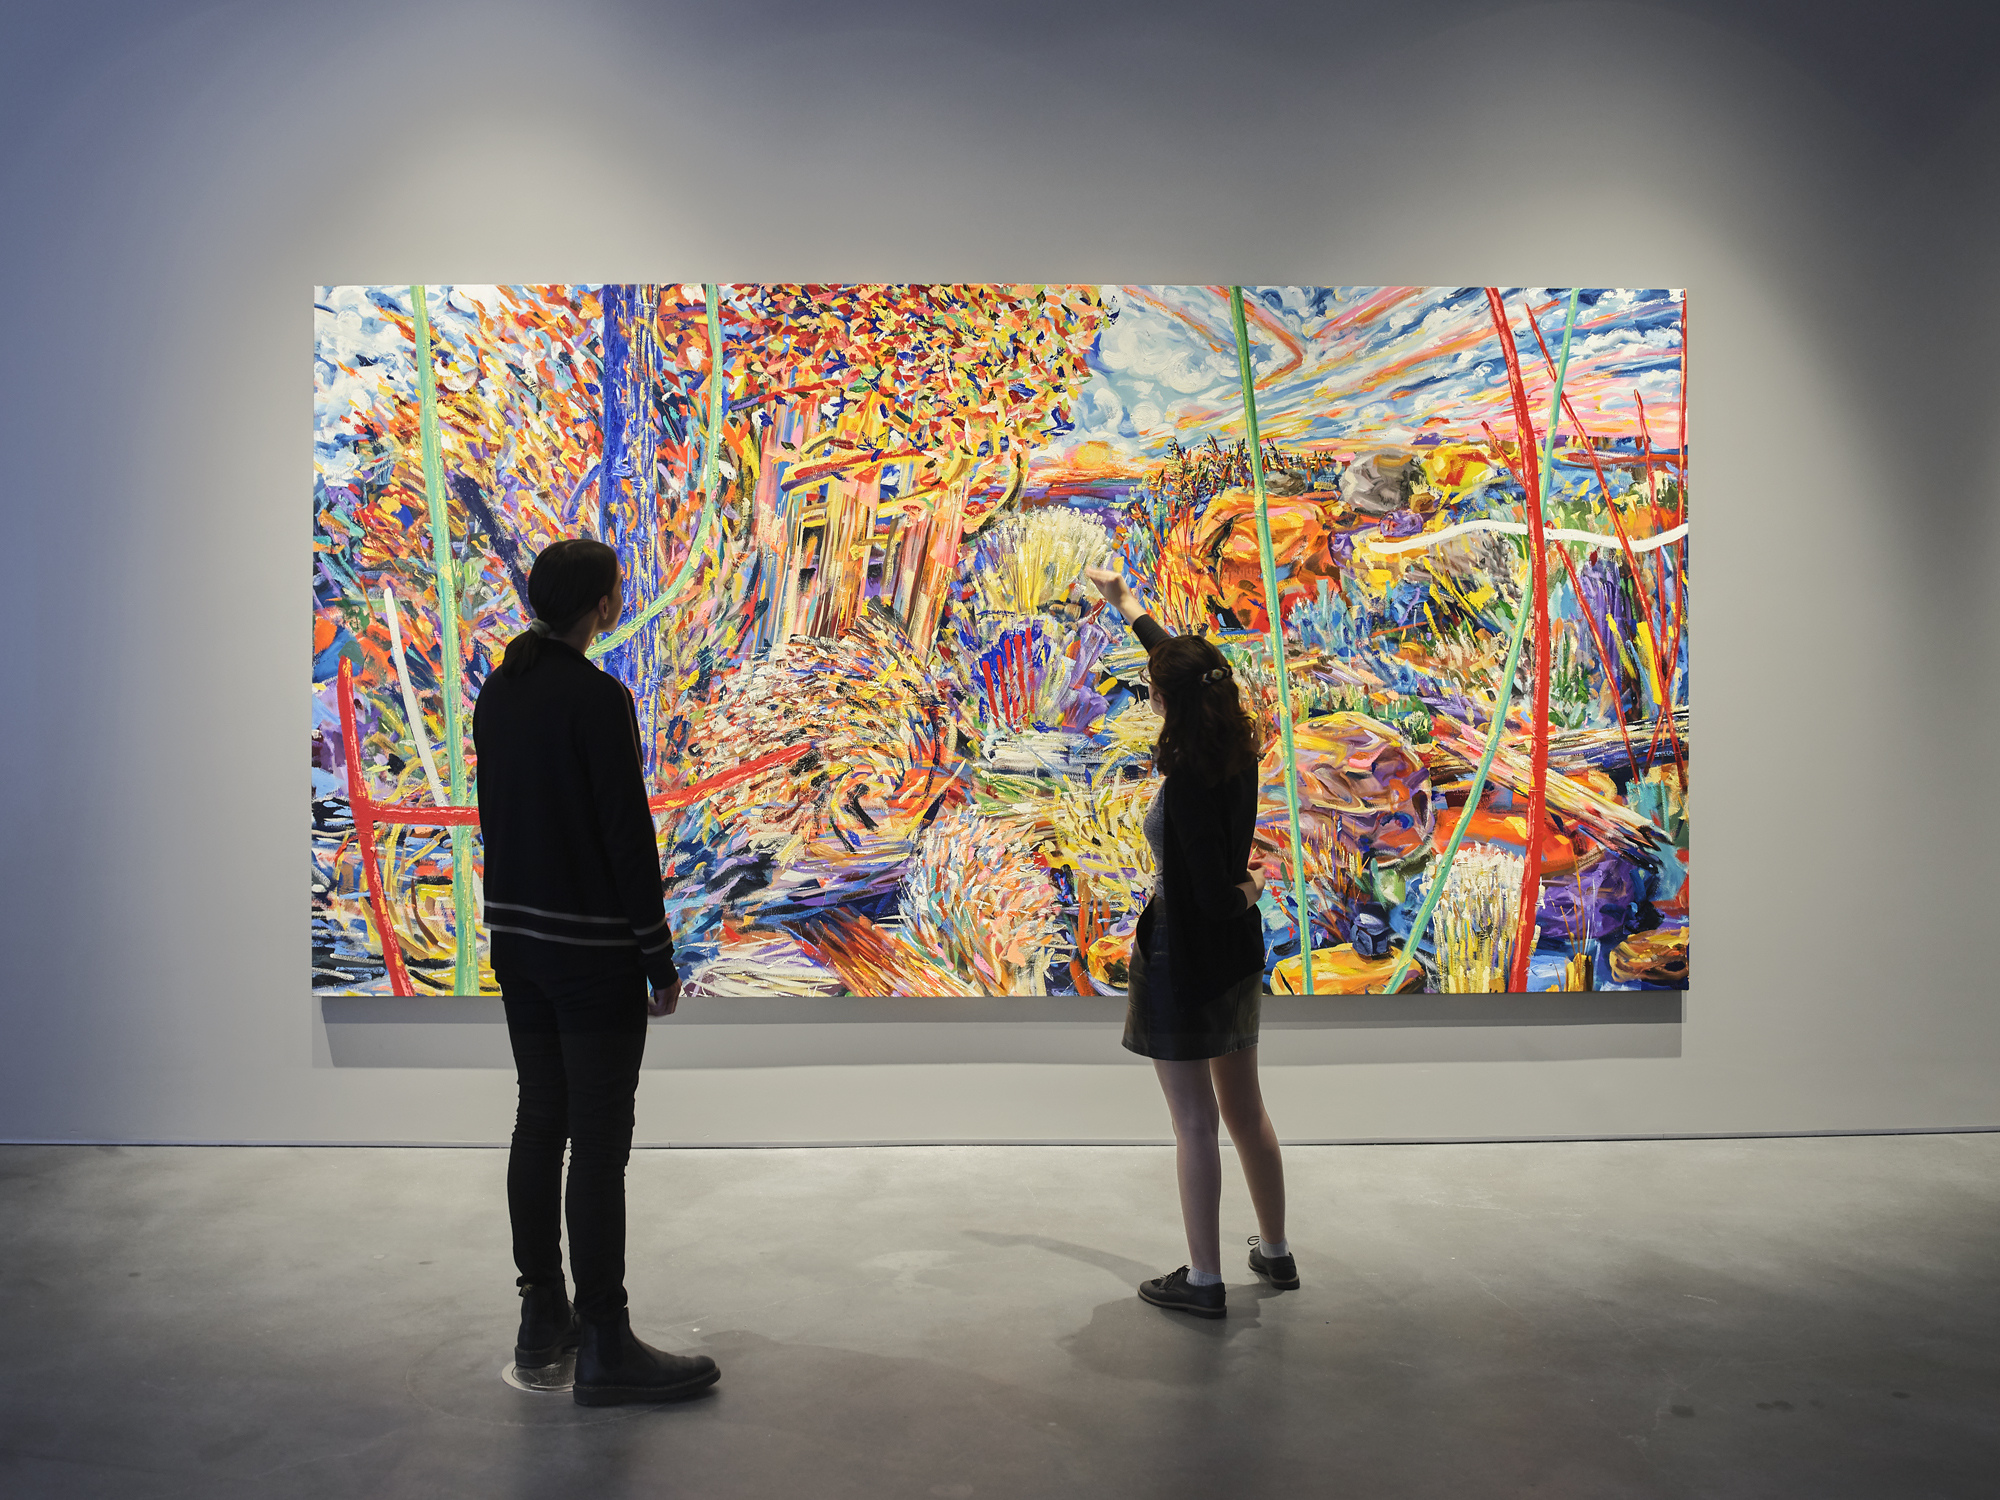 Two adults stand in front of a large, brightly colored painting of an abstract landscape